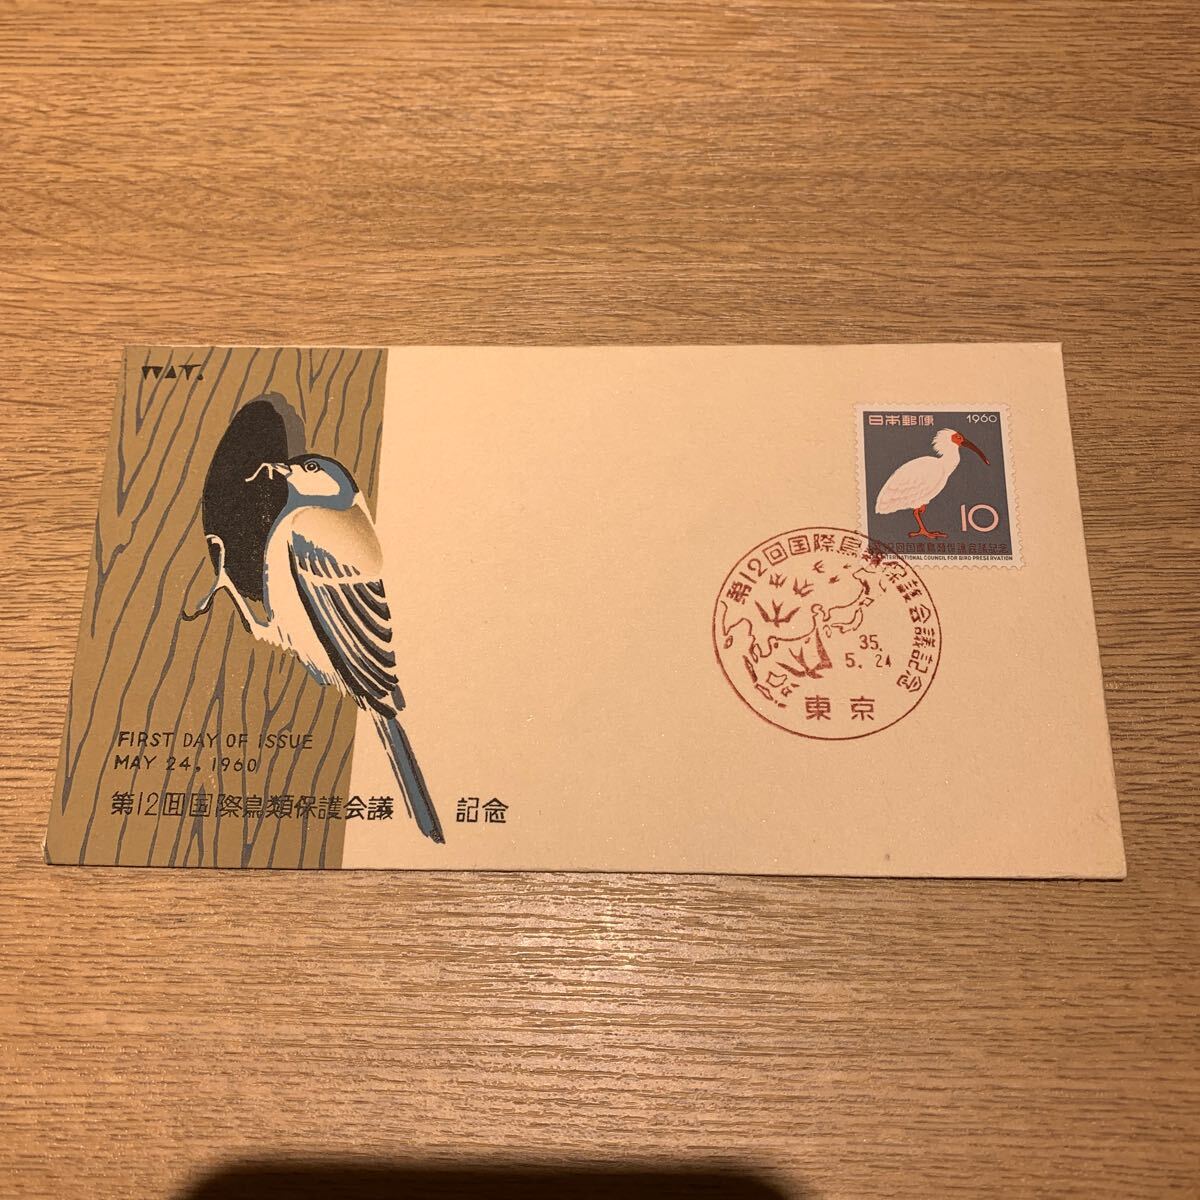  First Day Cover no. 12 times international birds protection meeting memory mail stamp Showa era 35 year issue 